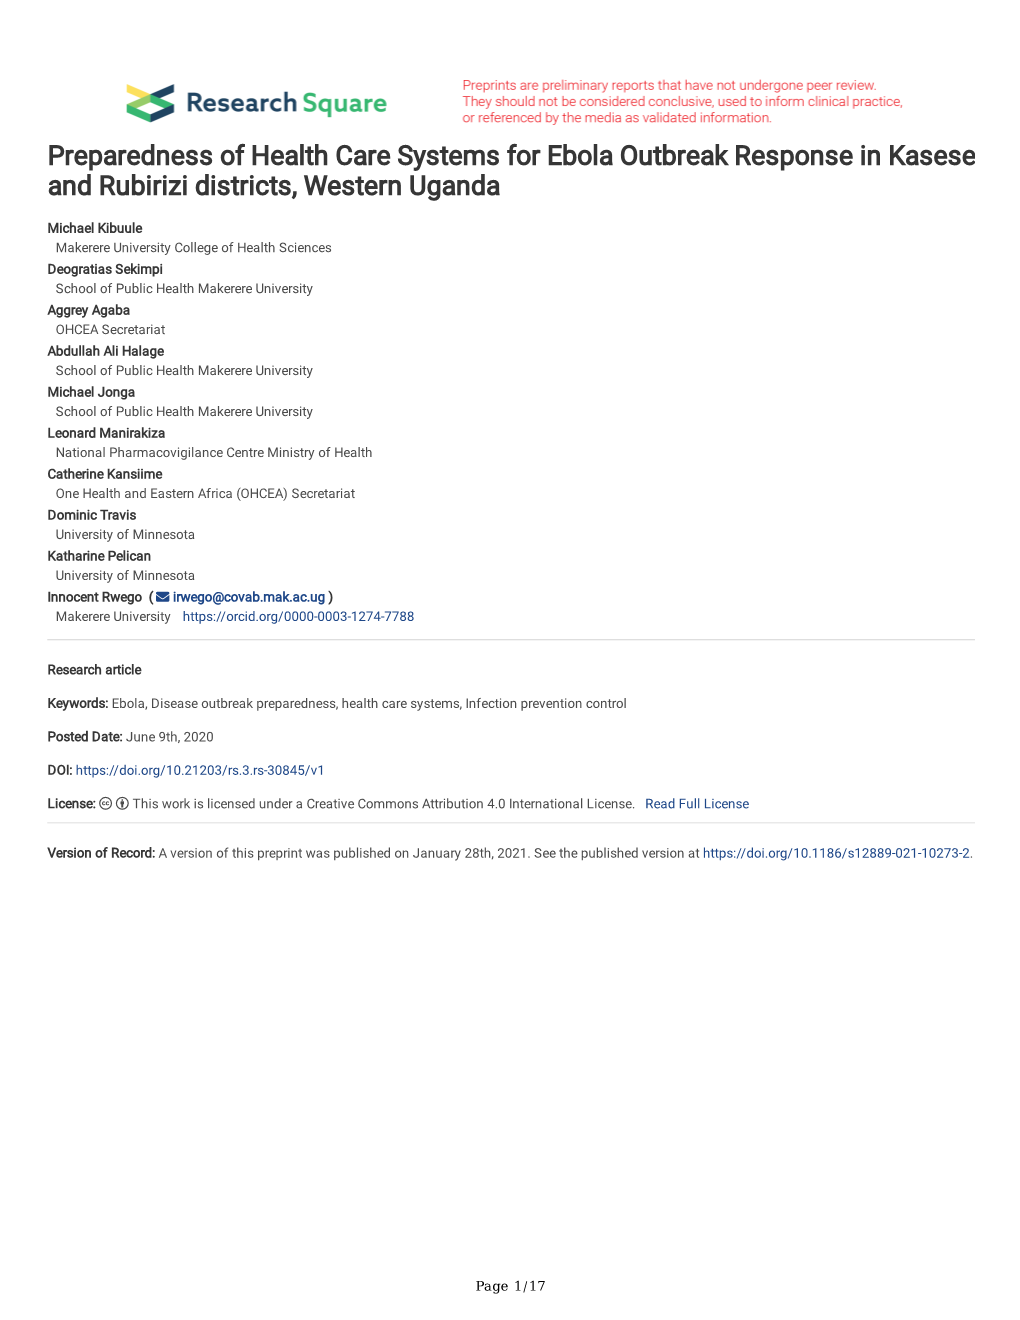 Preparedness of Health Care Systems for Ebola Outbreak Response in Kasese and Rubirizi Districts, Western Uganda